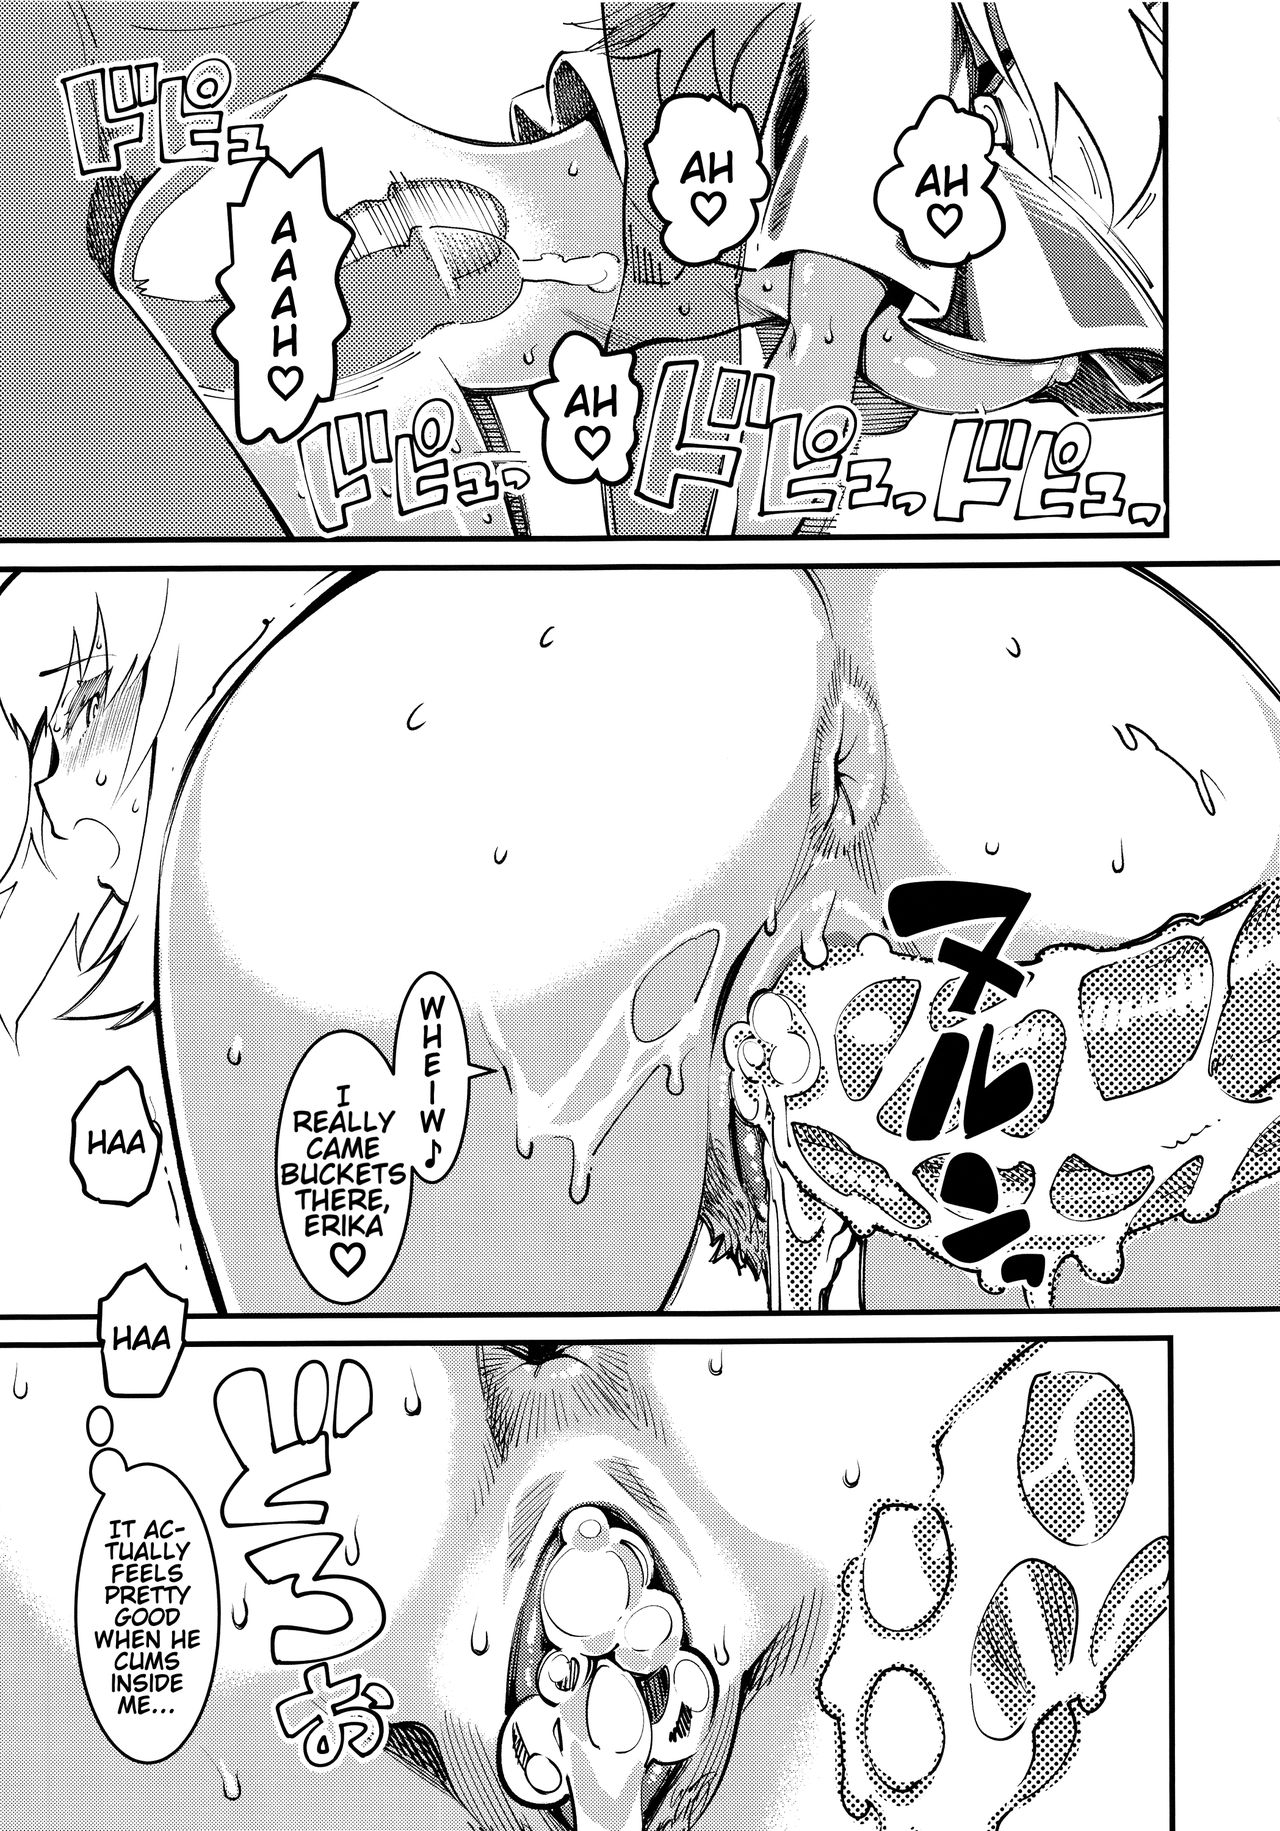 (COMIC1☆13) [ハイパーピンチ (clover)] GIRLS and CAMPER and NUDIST (ガールズ&パンツァー) [英訳]